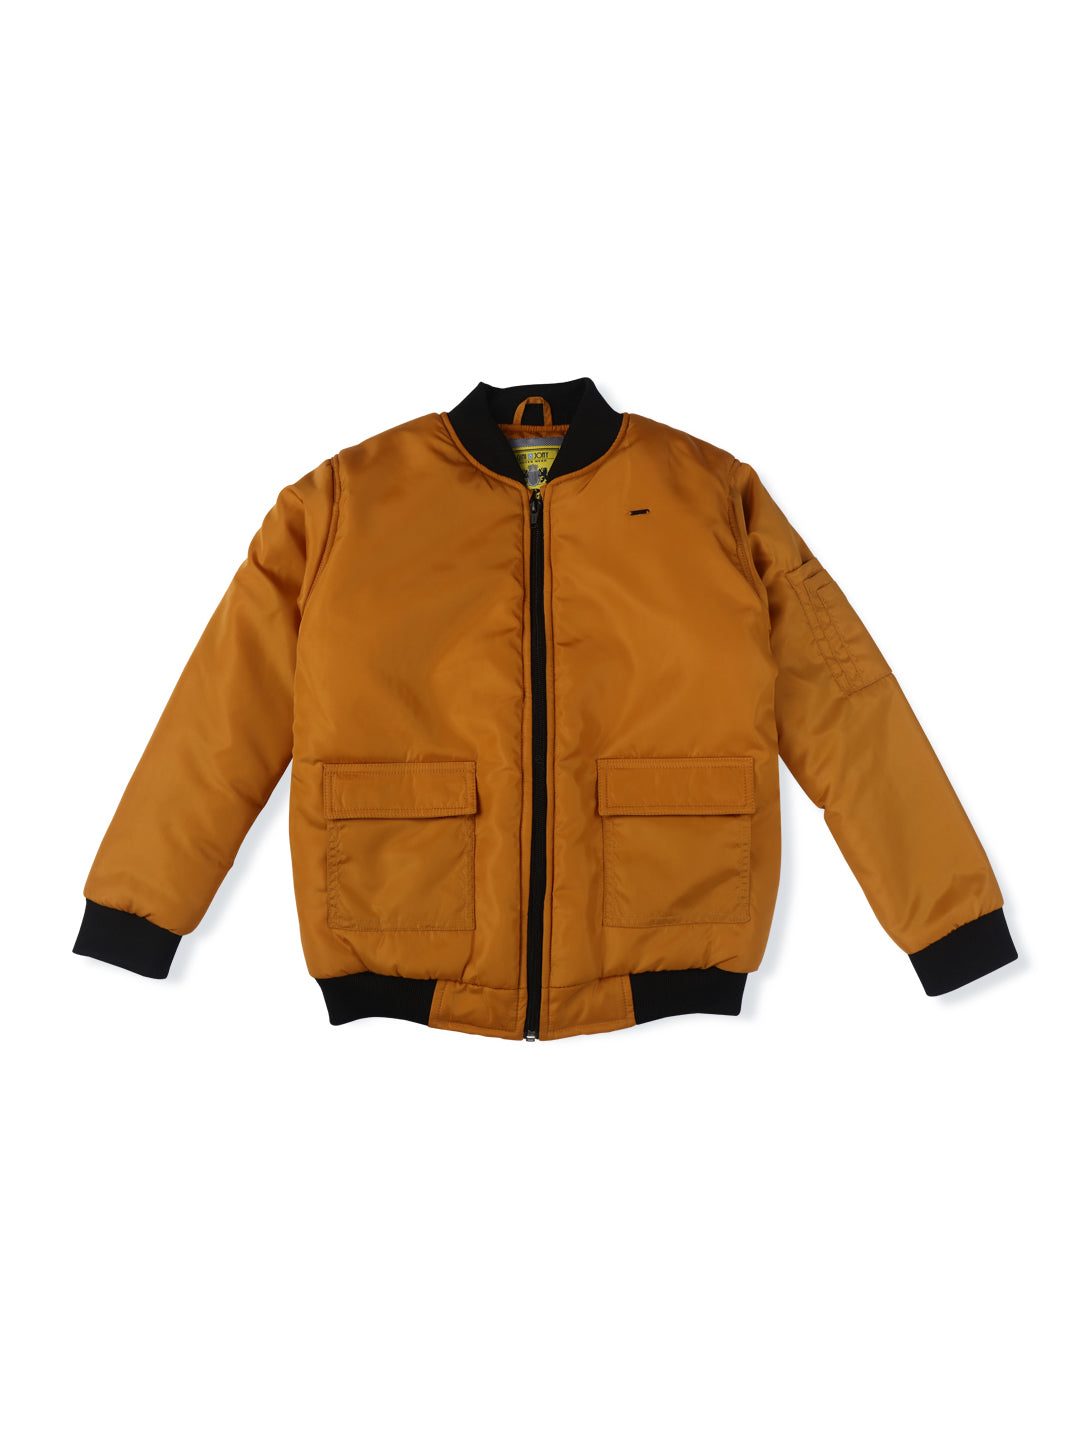 Boys Yellow Solid Polyster Heavy Winter Jacket